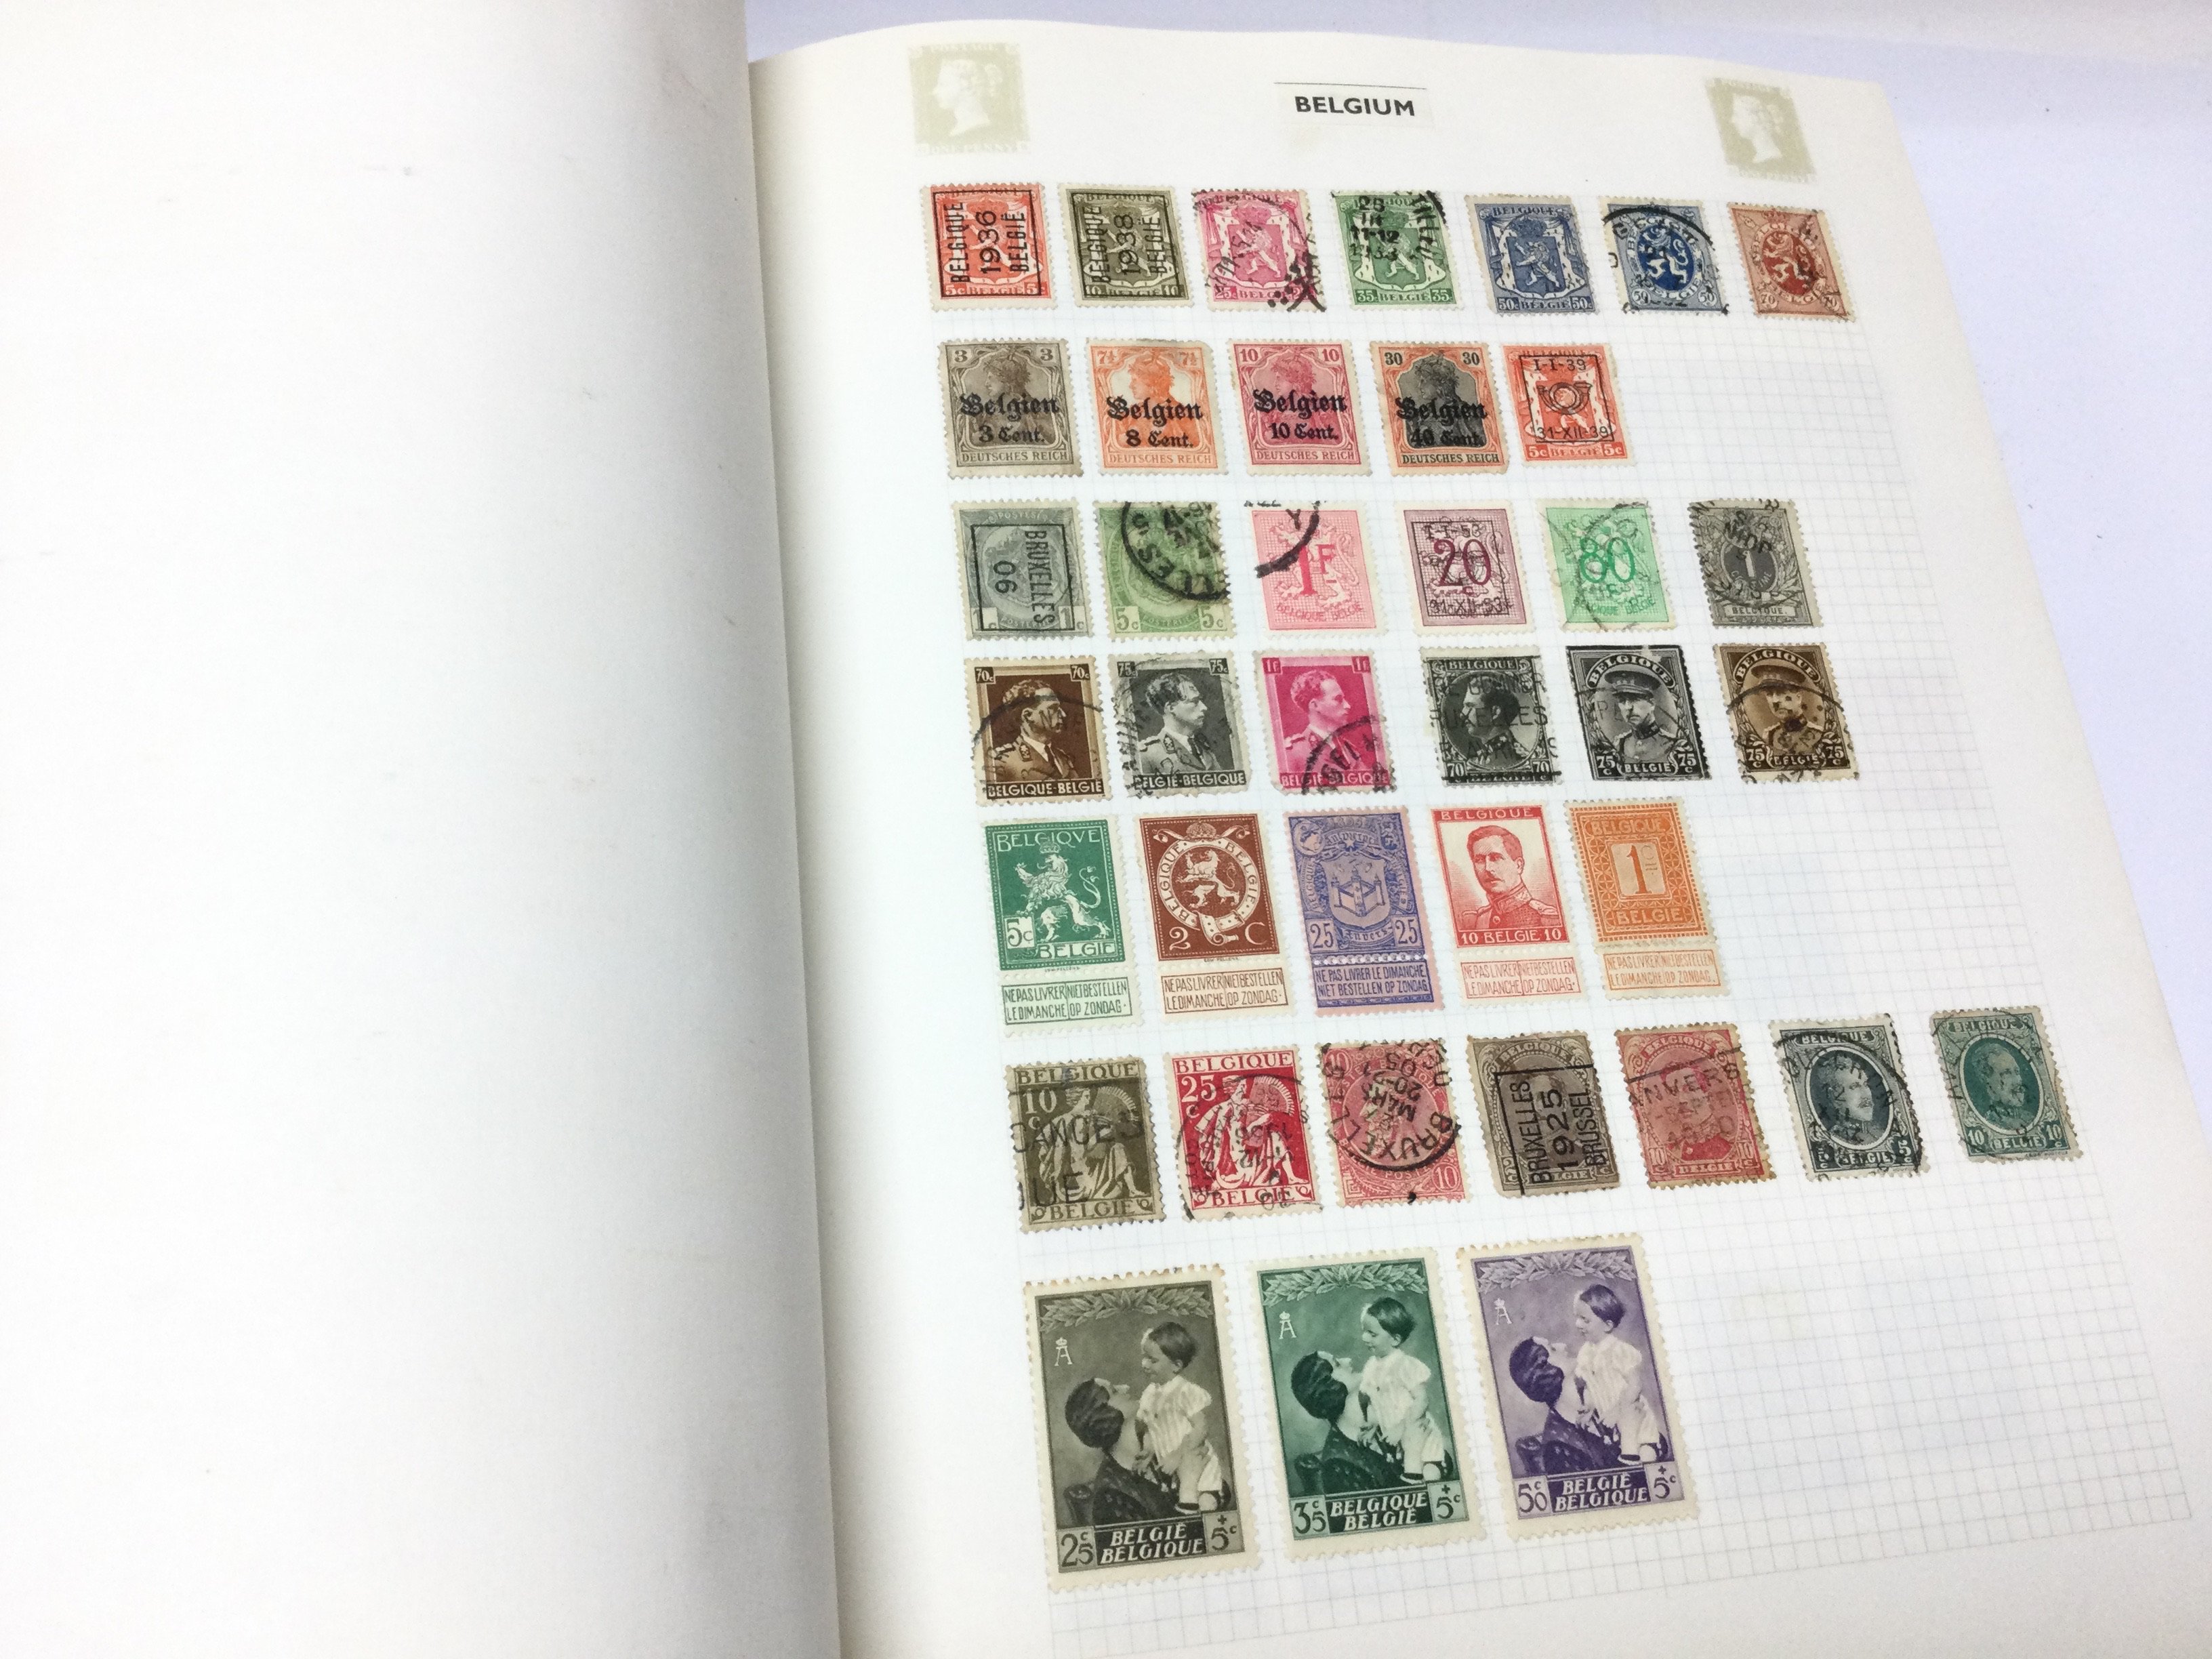 Stanley Gibbons stamp album and a collection of lo - Image 10 of 11